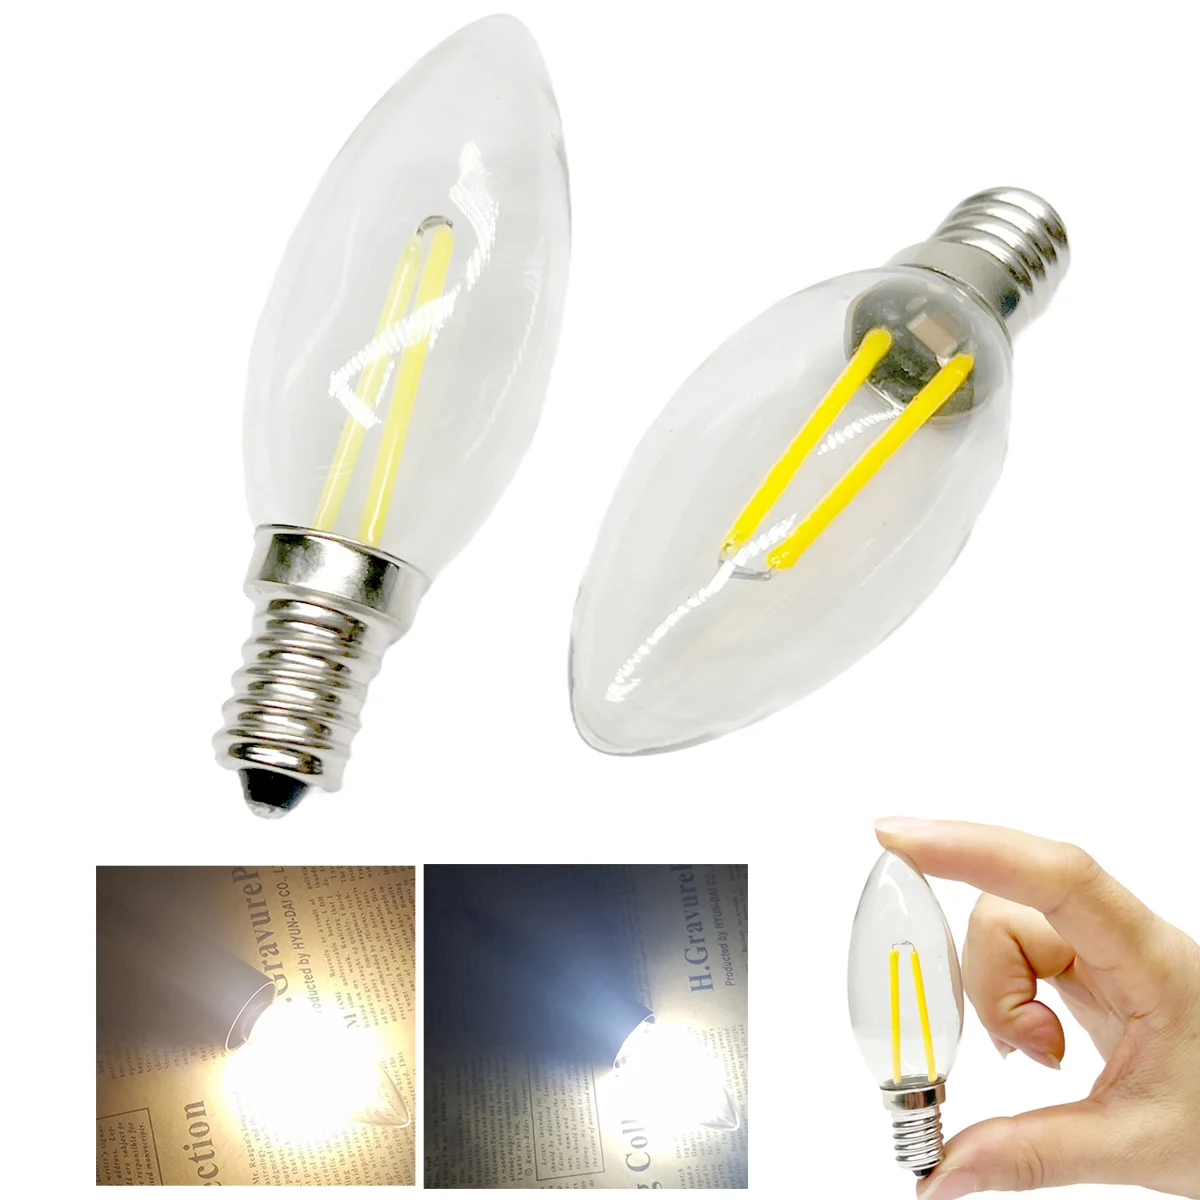 C25 E14 E12 LED Candelabra Candle COB Filament Light Bulbs 2W Glass Shell Cold Warm White AC 110V 220V Lamps For Chandelier vintage candle led bulb c7 smoke glass e12 e14 base 0 5w edison light bulb 2700k 4500k candelabra lamp for string light garland